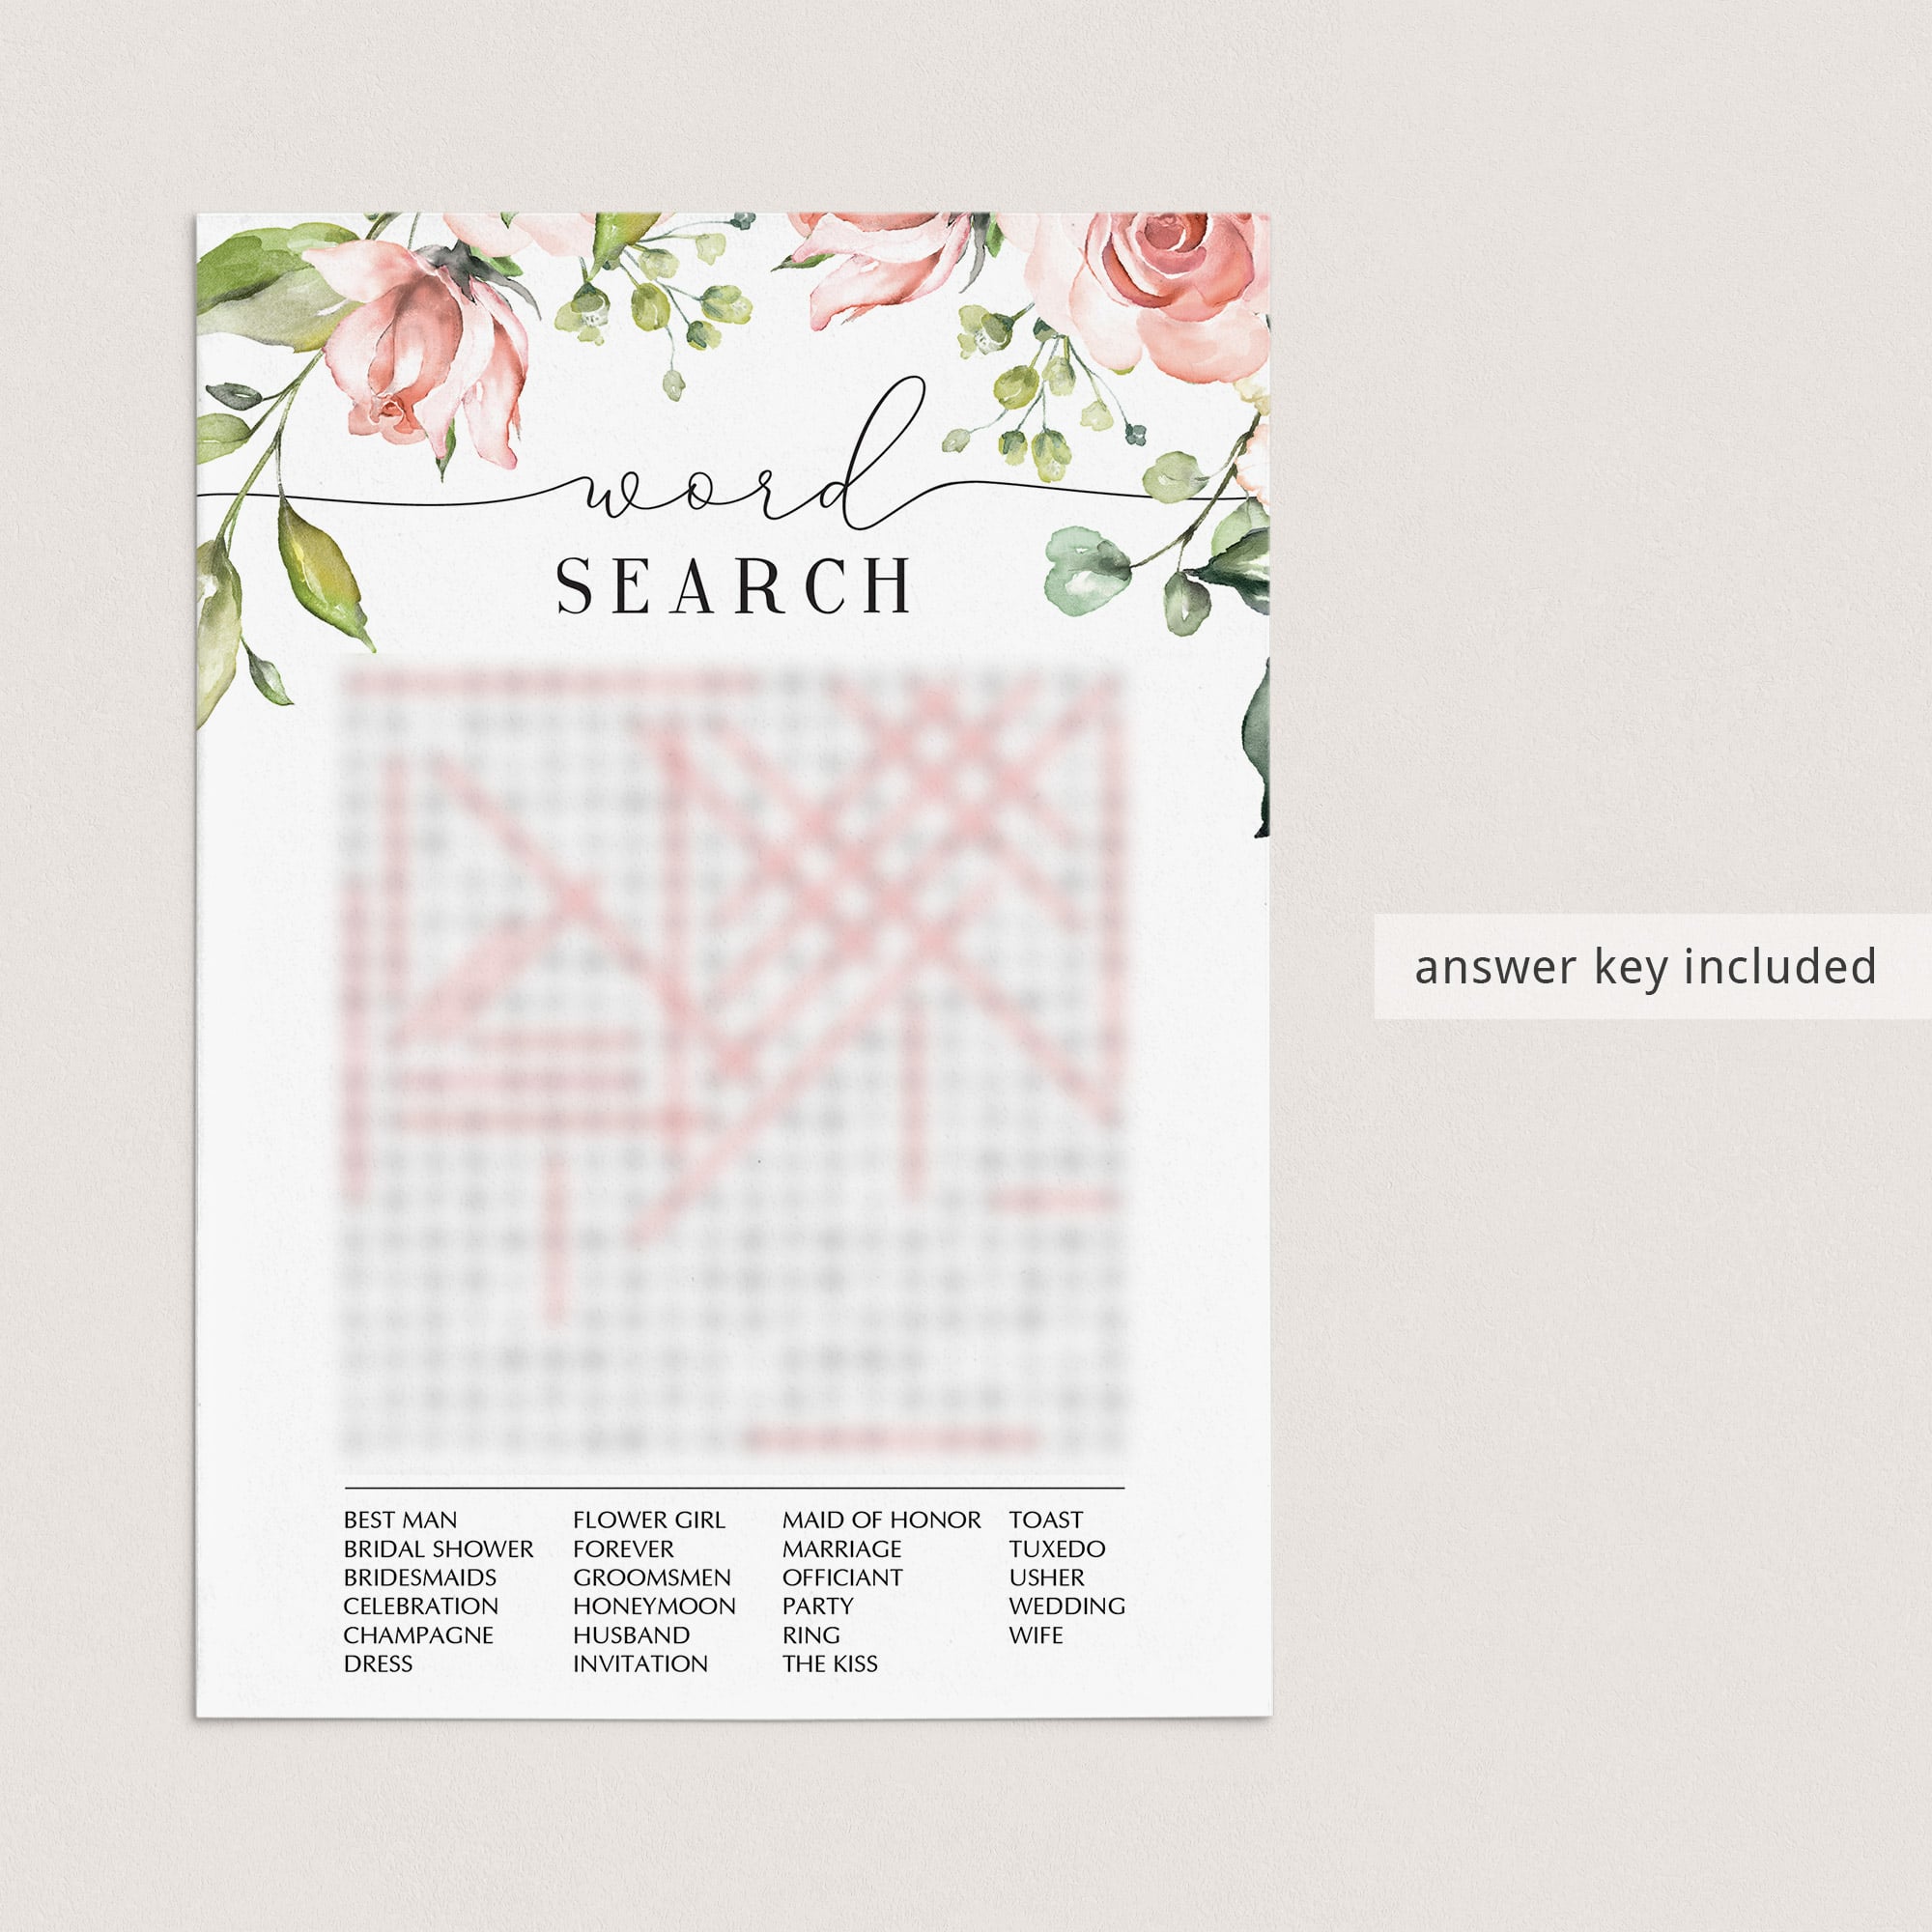 bridal word search with answer key included